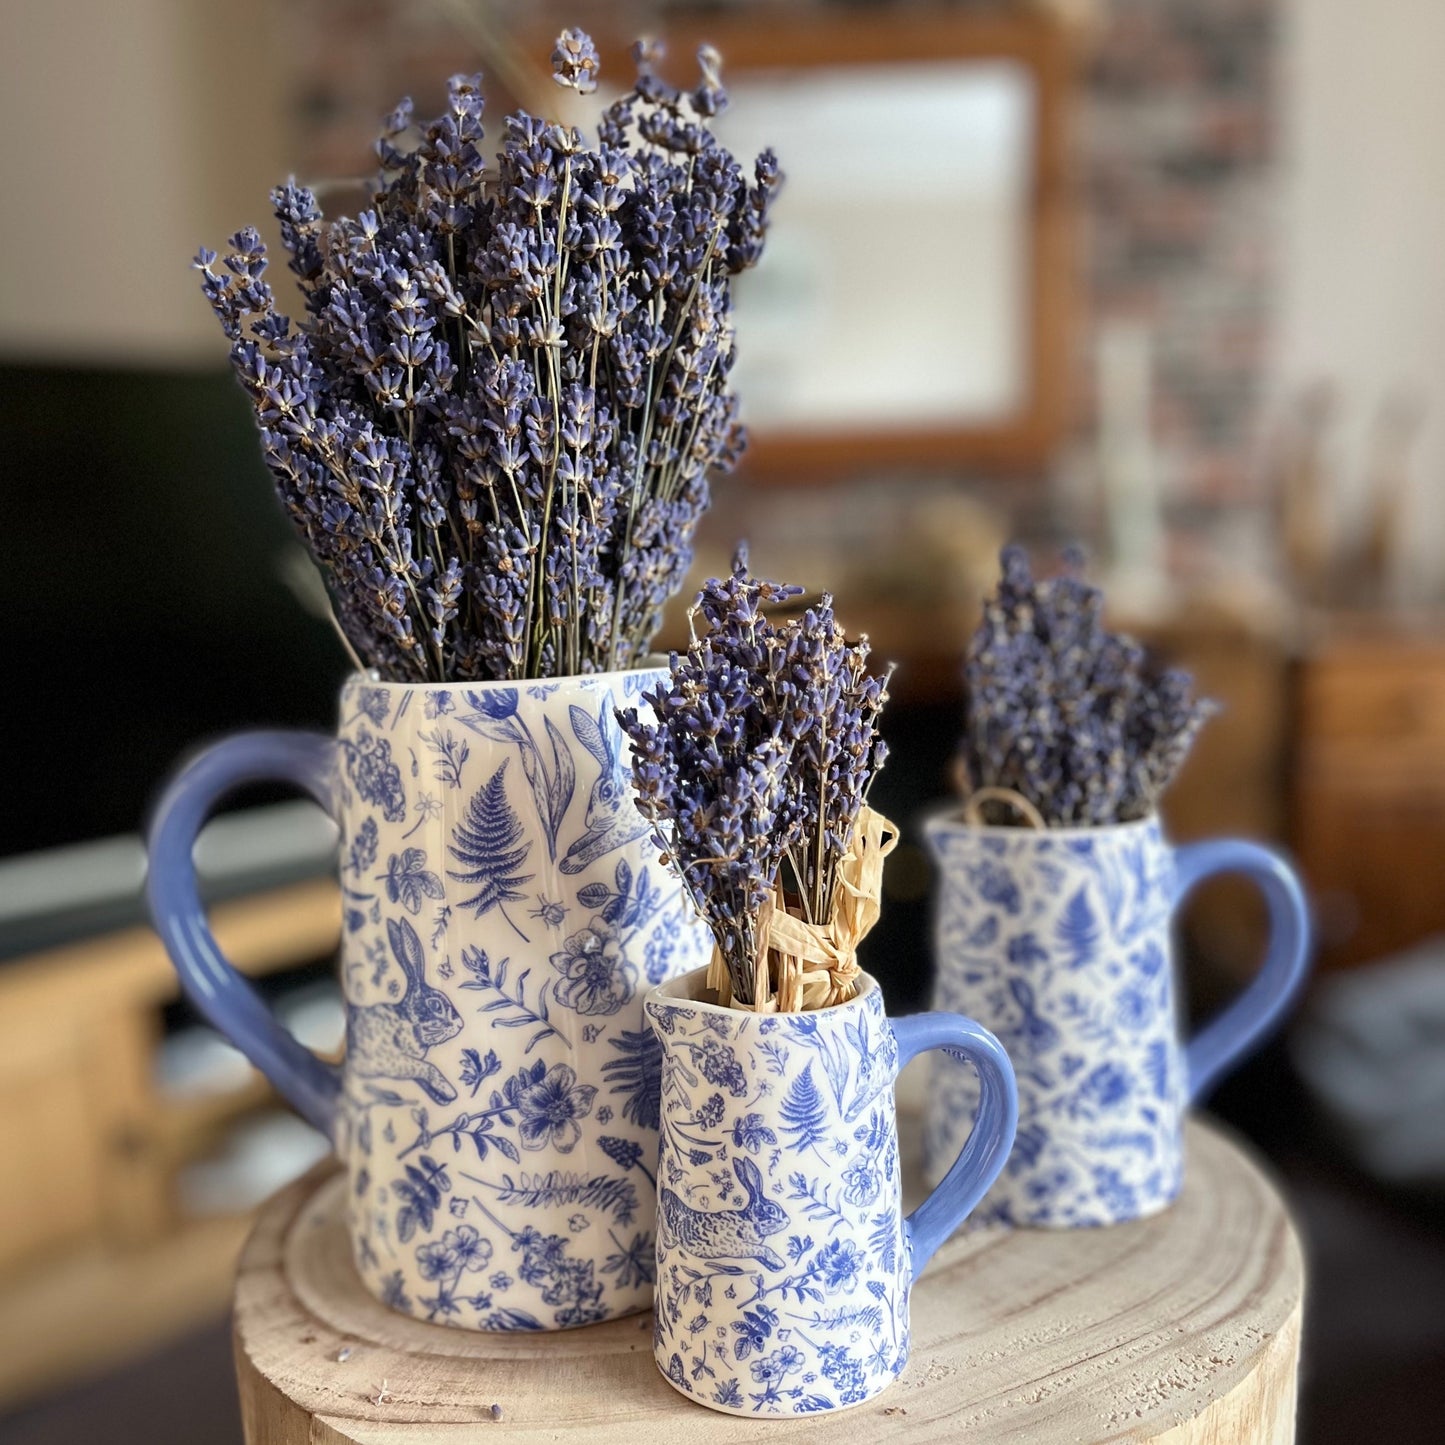 Set of 3 Jugs Displayed With Lavender Homely Background